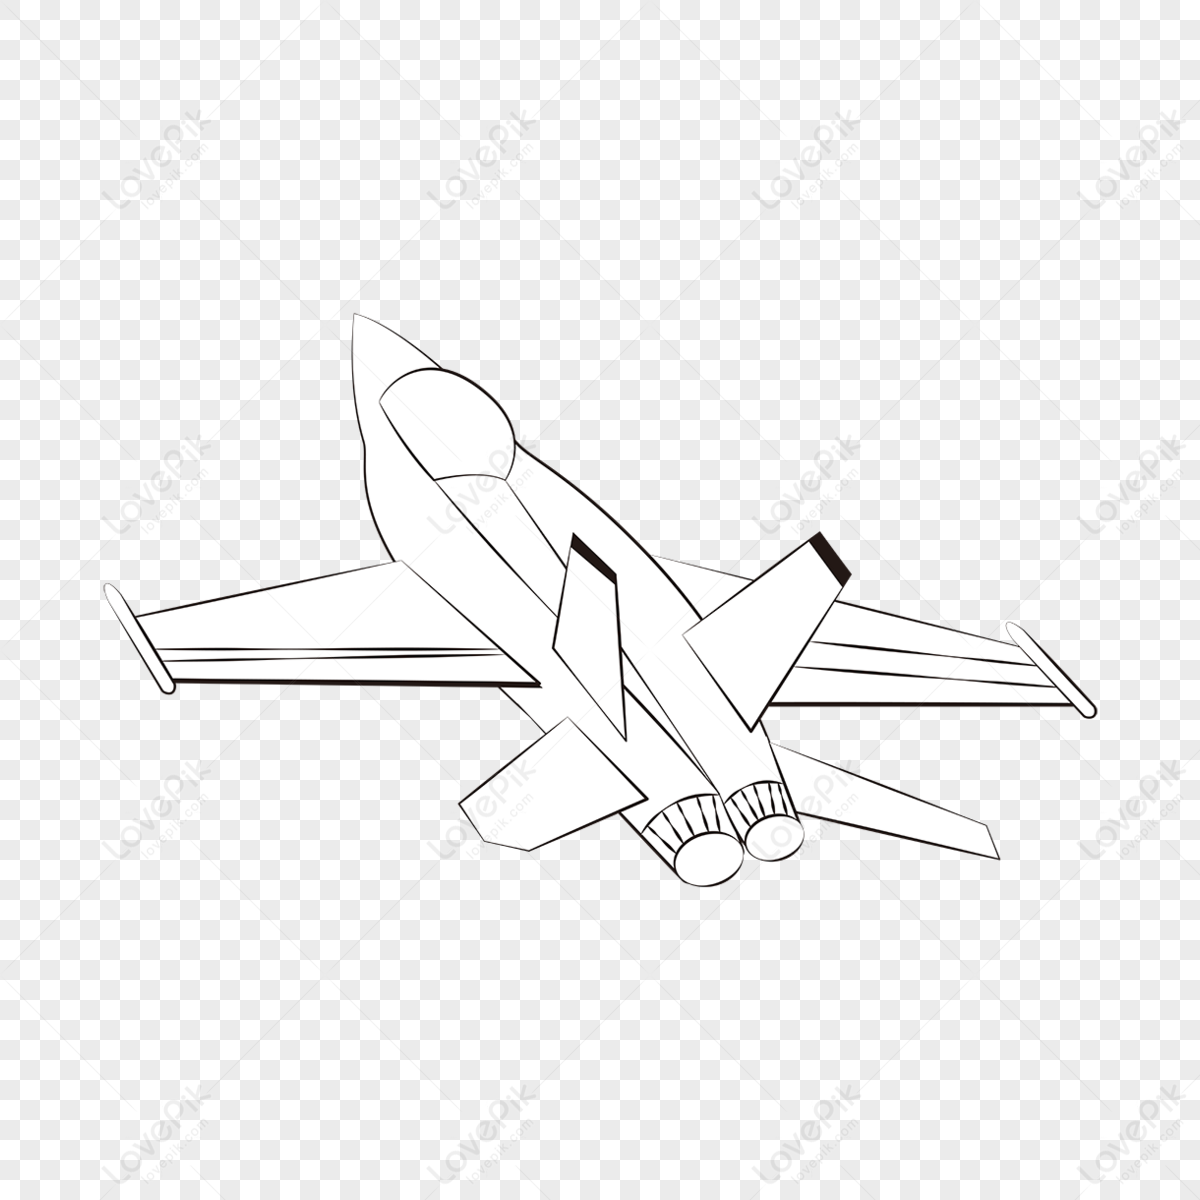 Airplane PNG Transparent Images Free Download - Pngfre